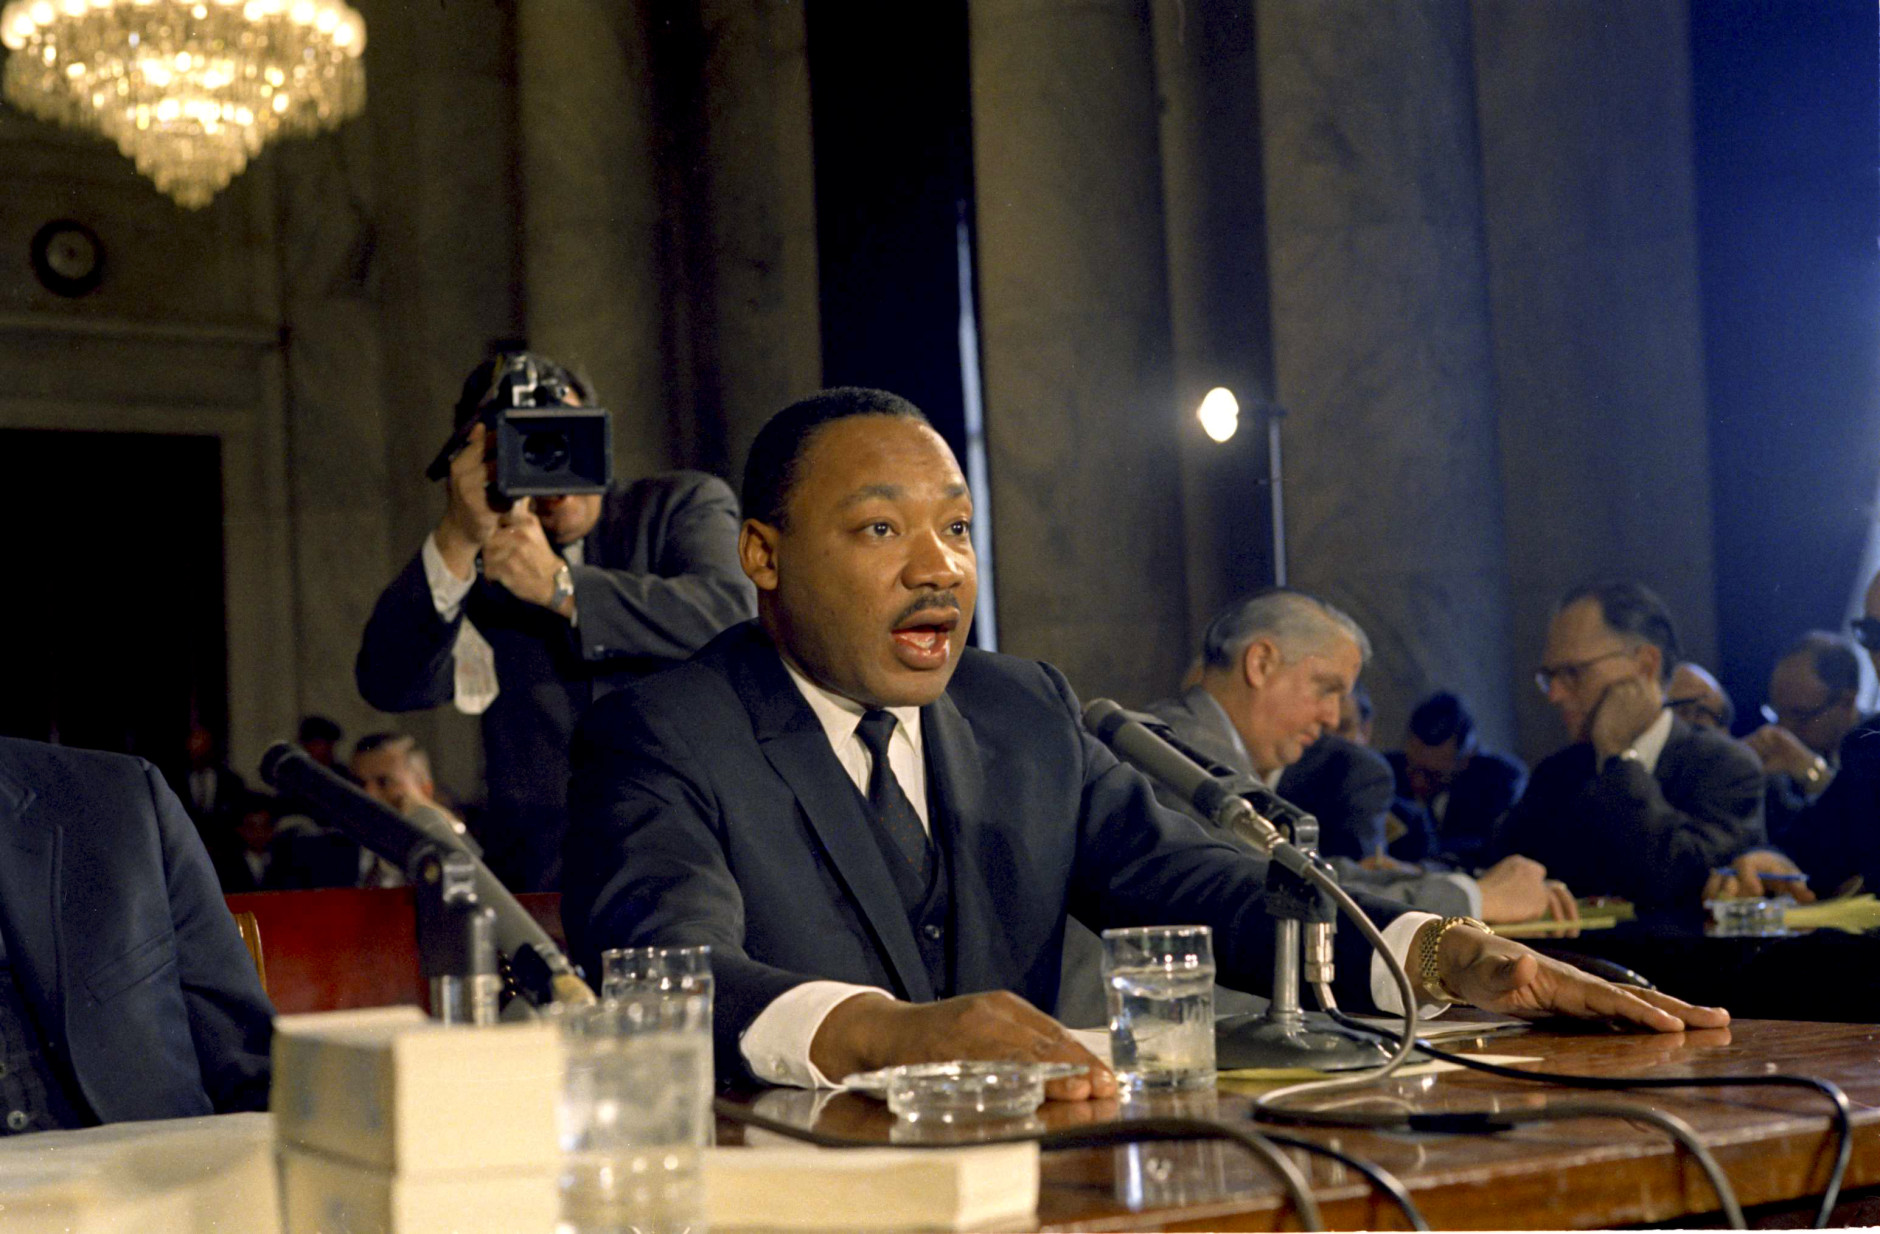 Dr. Martin Luther King civil rights leader testifying before the Senate Government Operations subcommittee, December 15, 1966. (AP Photo)